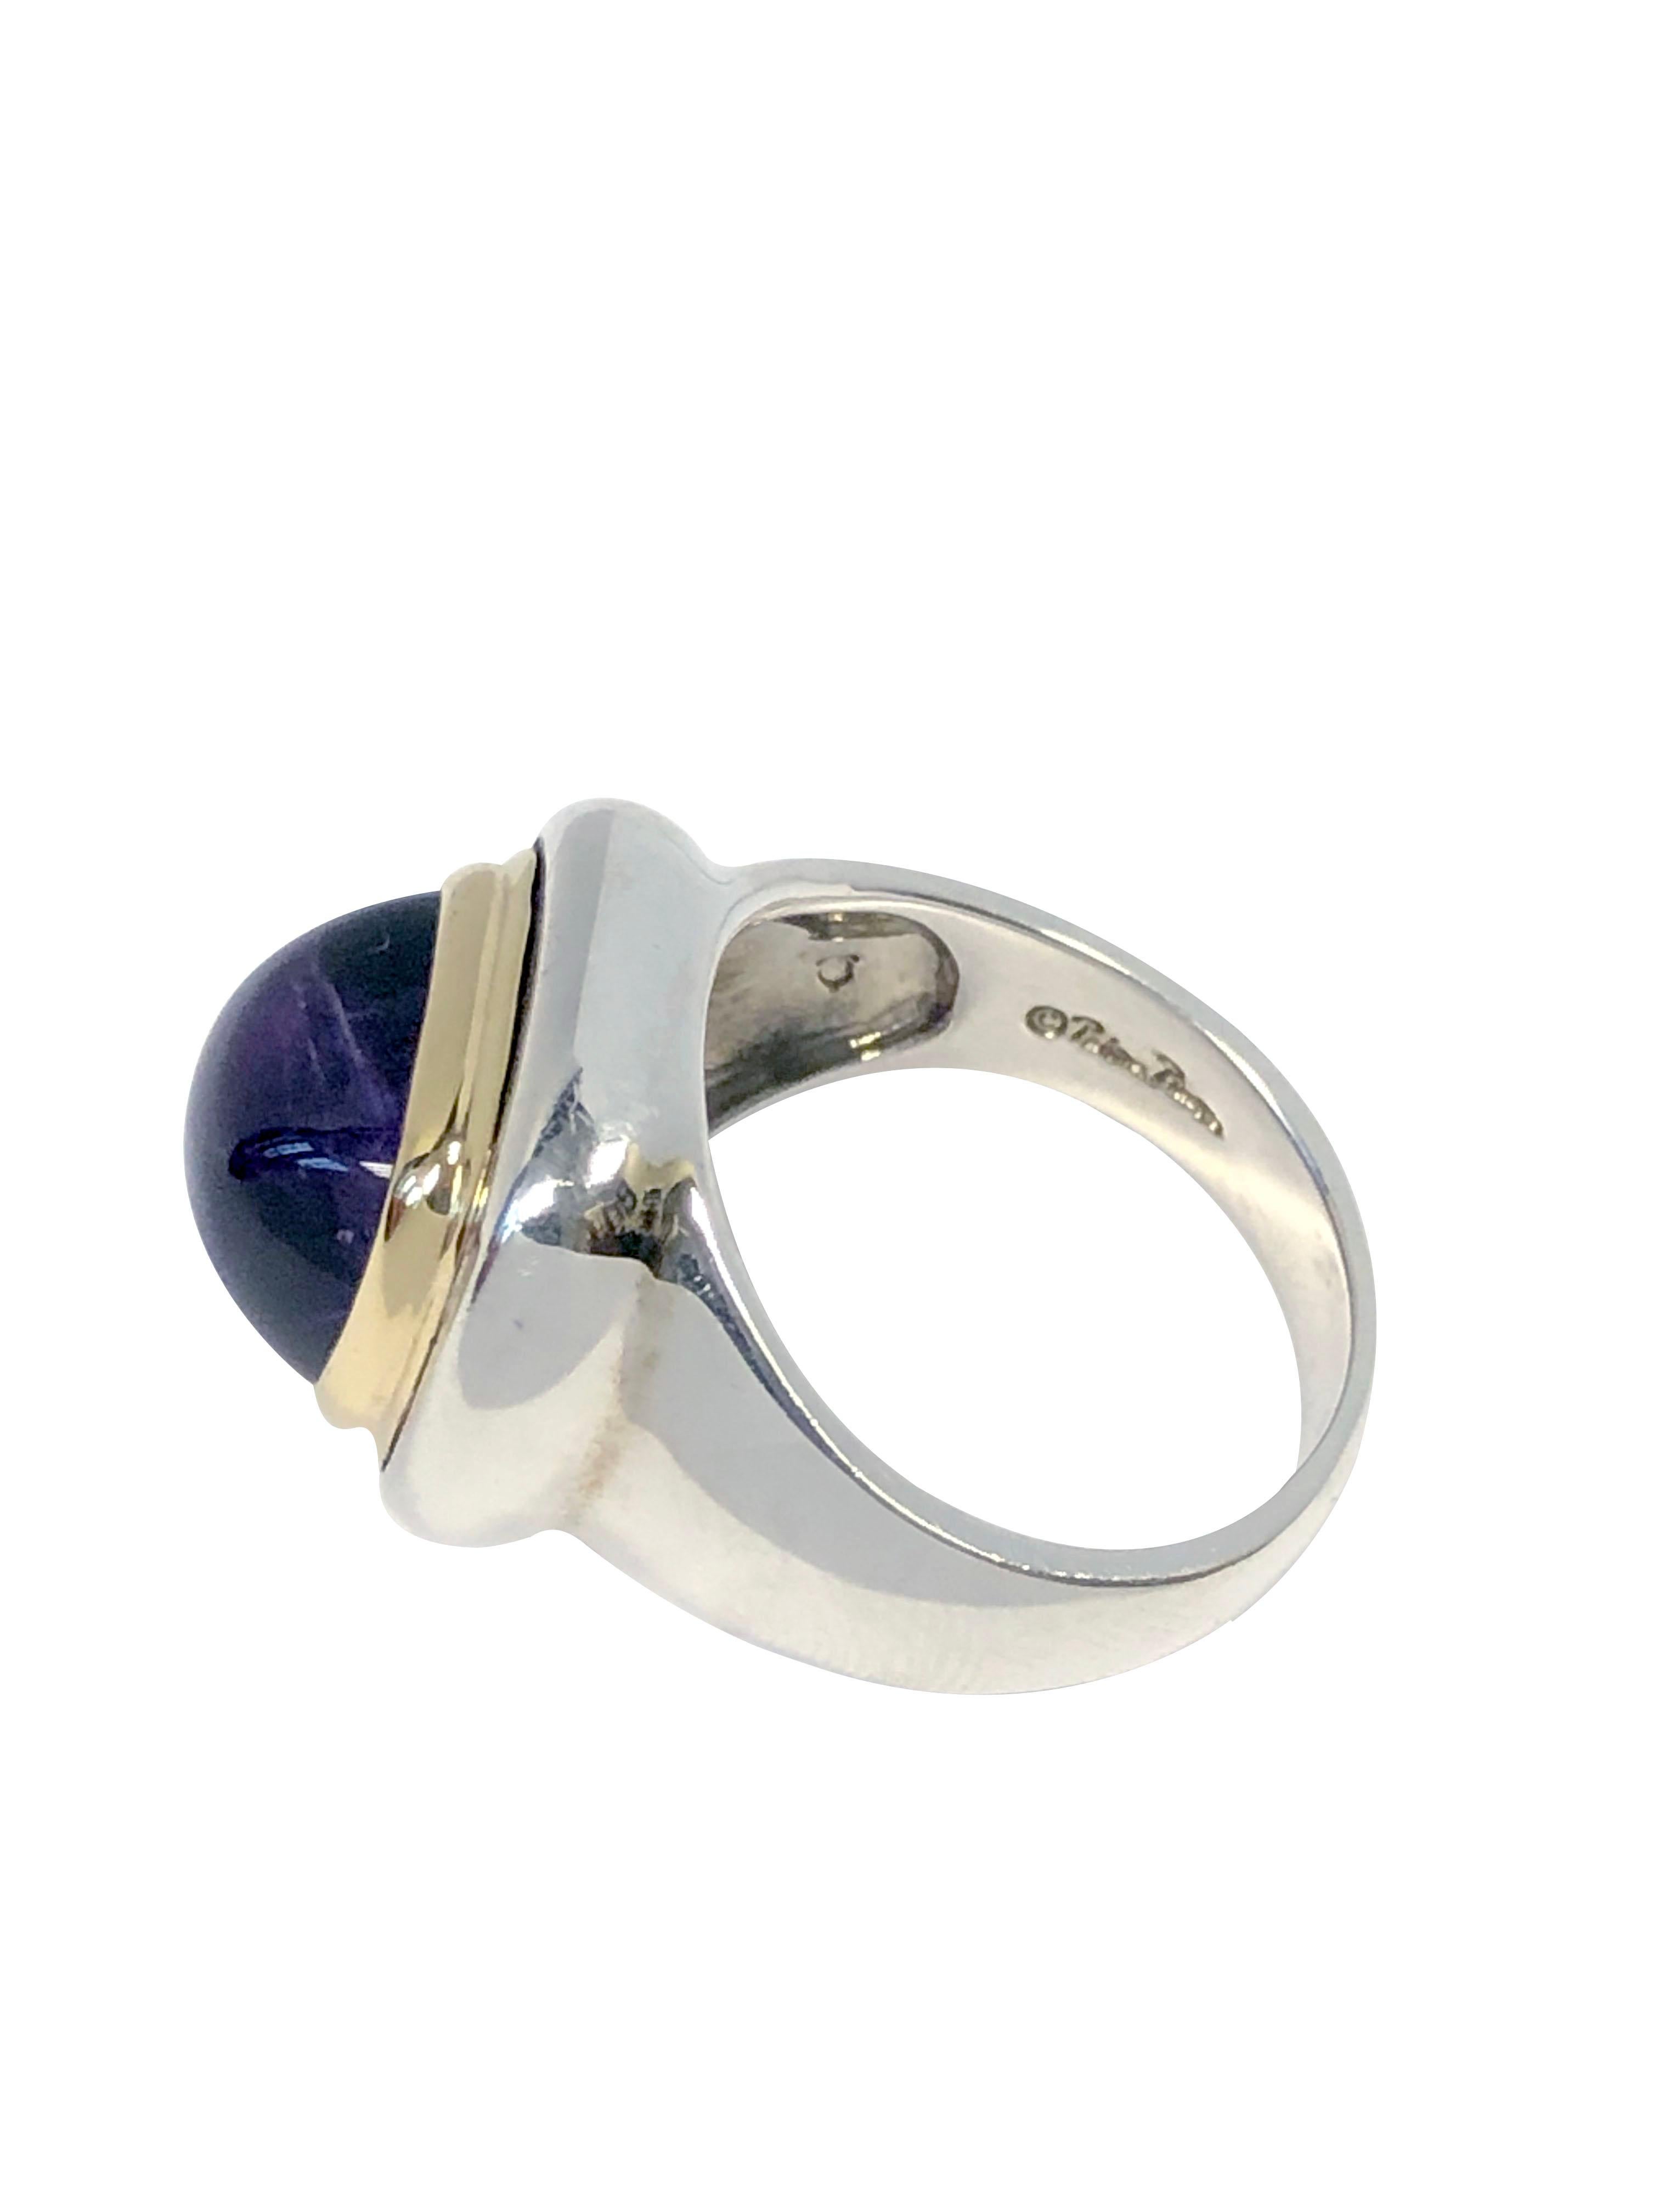 Circa 1980s Paloma Picasso for Tiffany & Company Sterling Silver and 18k Yellow Gold Ring, Set with a Fine color domed cabochon Amethyst, the top of the ring measures 5/8 x 1/2 inch. Finger size 7.  Excellent near unworn condition.